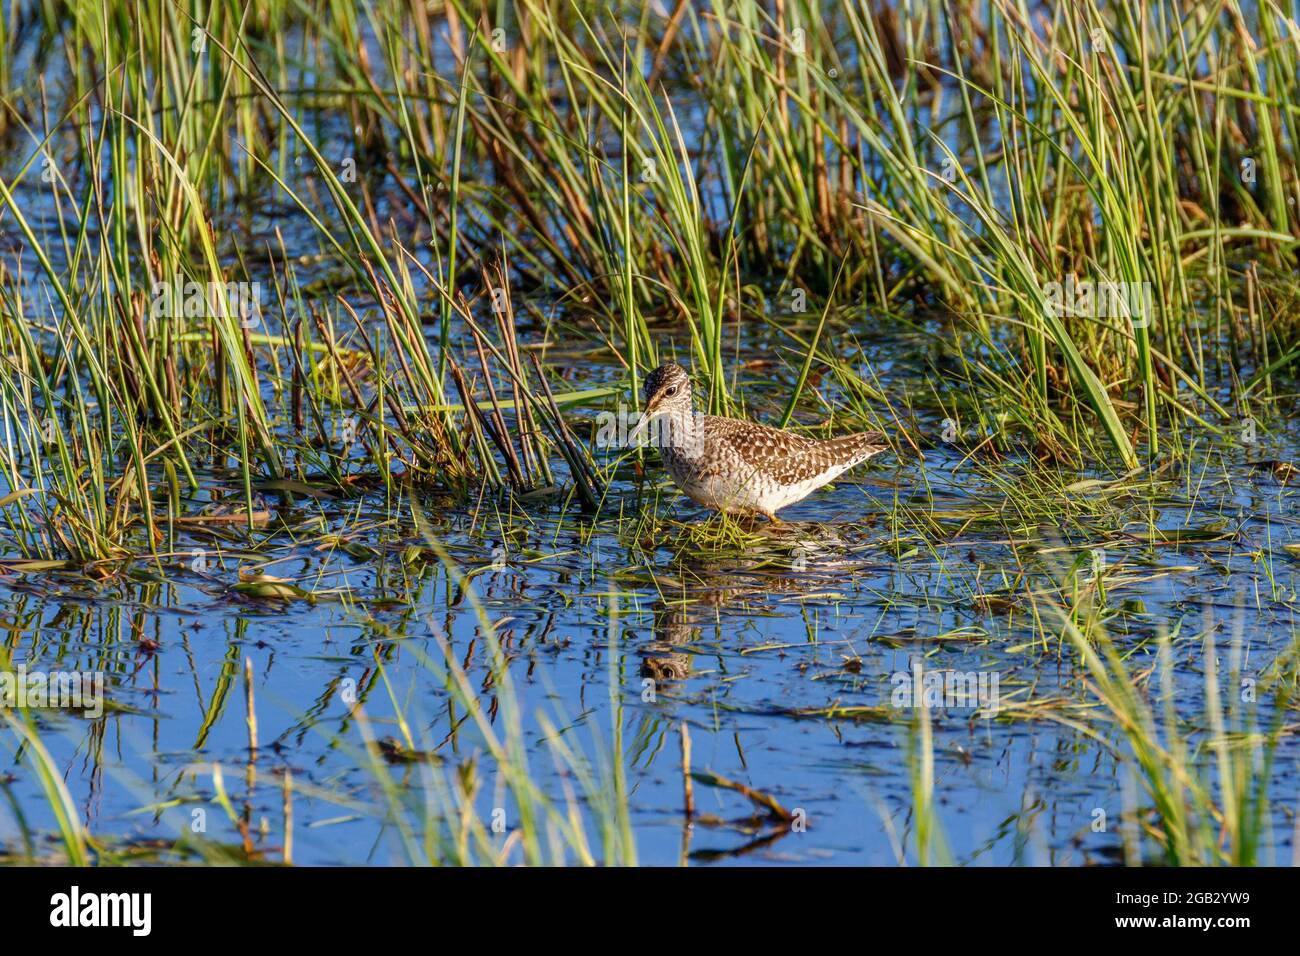 Wetland with an Sandpiper among the grass Stock Photo